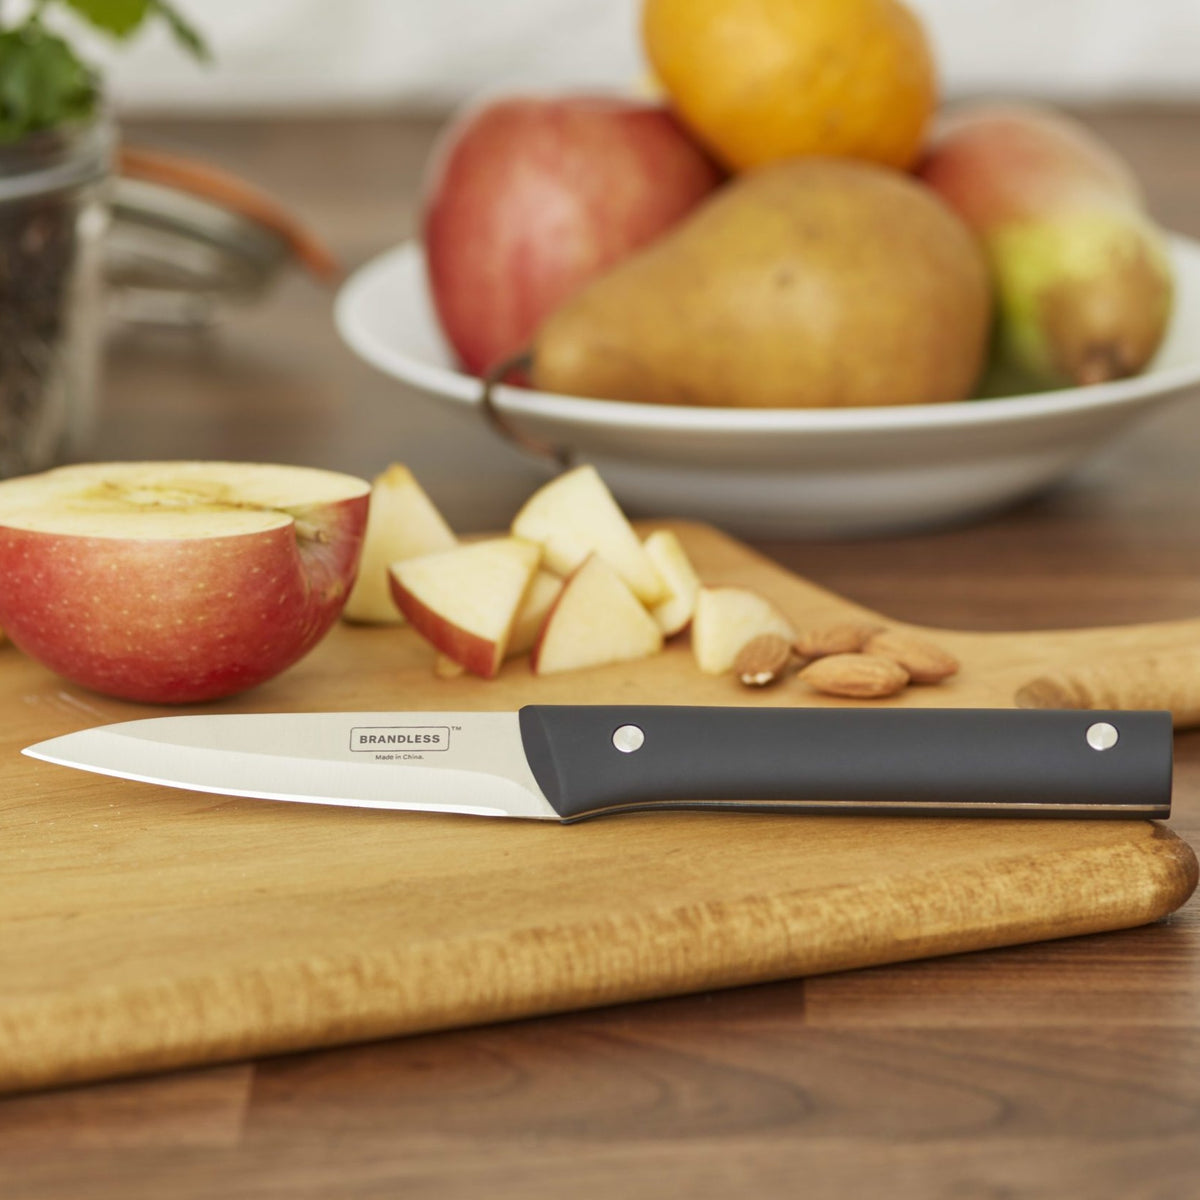 Lifestyle photo, paring knife laying on a wood cutting board on a kitchen table with a diced apple, some almonds, and pears ready to be sliced.